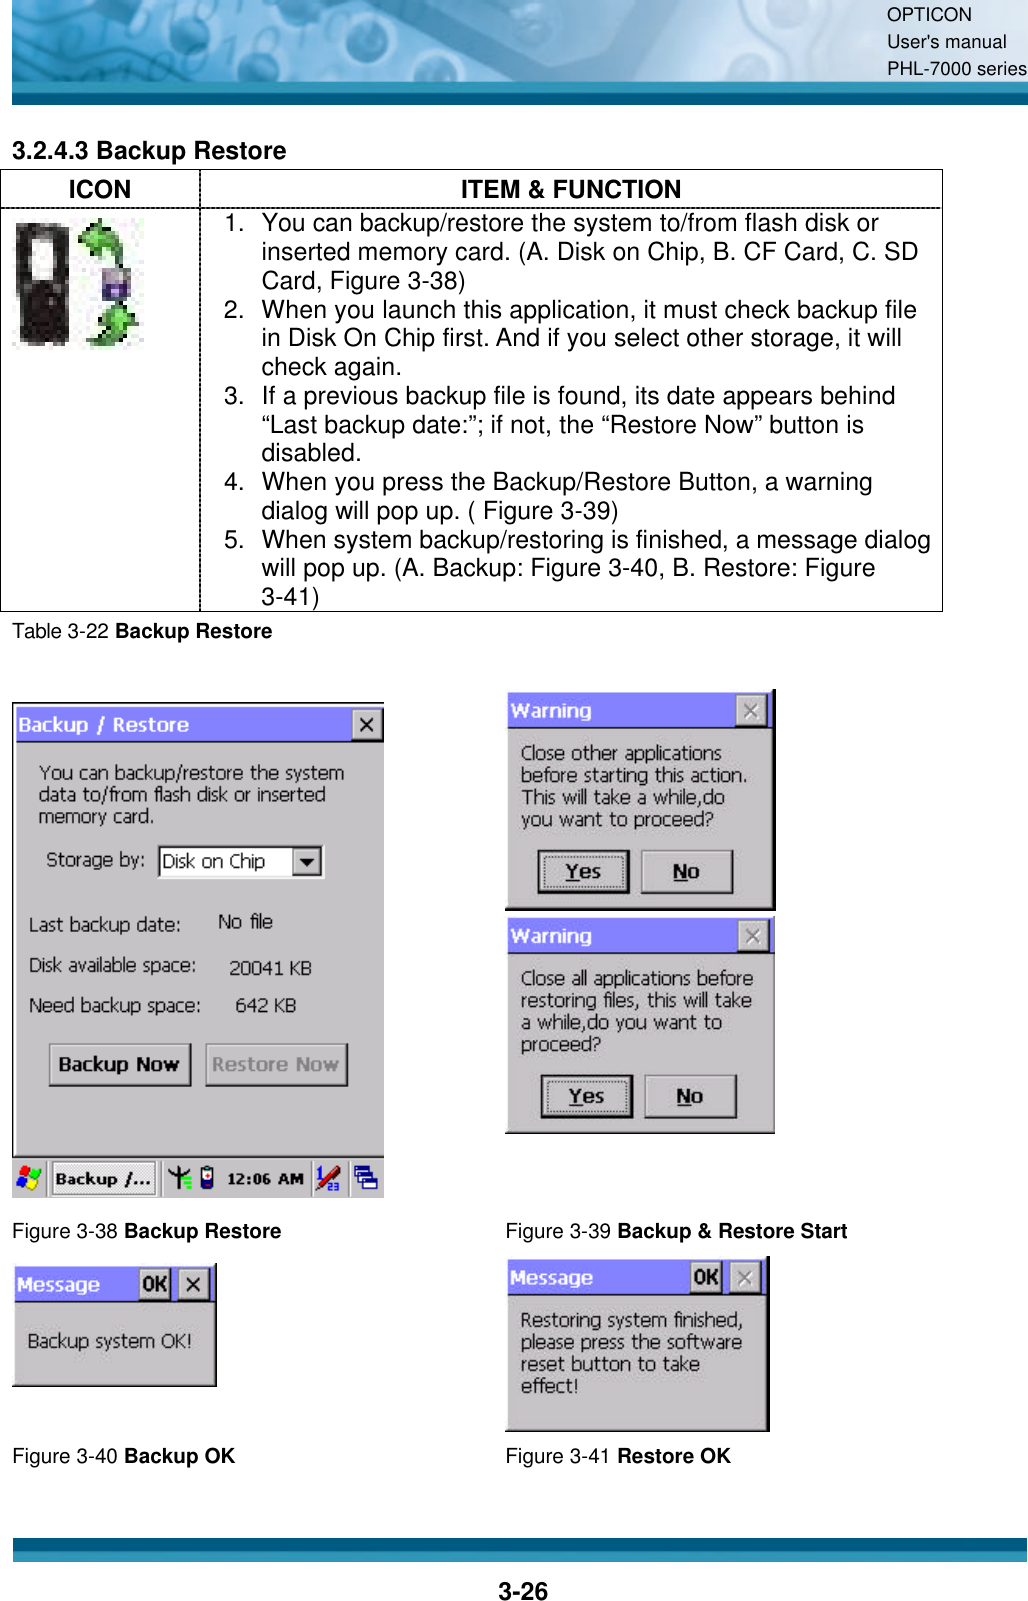 OPTICON User&apos;s manual PHL-7000 series    3-26 3.2.4.3 Backup Restore ICON ITEM &amp; FUNCTION  1. You can backup/restore the system to/from flash disk or inserted memory card. (A. Disk on Chip, B. CF Card, C. SD Card, Figure 3-38) 2. When you launch this application, it must check backup file in Disk On Chip first. And if you select other storage, it will check again. 3. If a previous backup file is found, its date appears behind “Last backup date:”; if not, the “Restore Now” button is disabled. 4. When you press the Backup/Restore Button, a warning dialog will pop up. ( Figure 3-39) 5. When system backup/restoring is finished, a message dialog will pop up. (A. Backup: Figure 3-40, B. Restore: Figure 3-41) Table 3-22 Backup Restore     Figure 3-38 Backup Restore Figure 3-39 Backup &amp; Restore Start   Figure 3-40 Backup OK Figure 3-41 Restore OK  